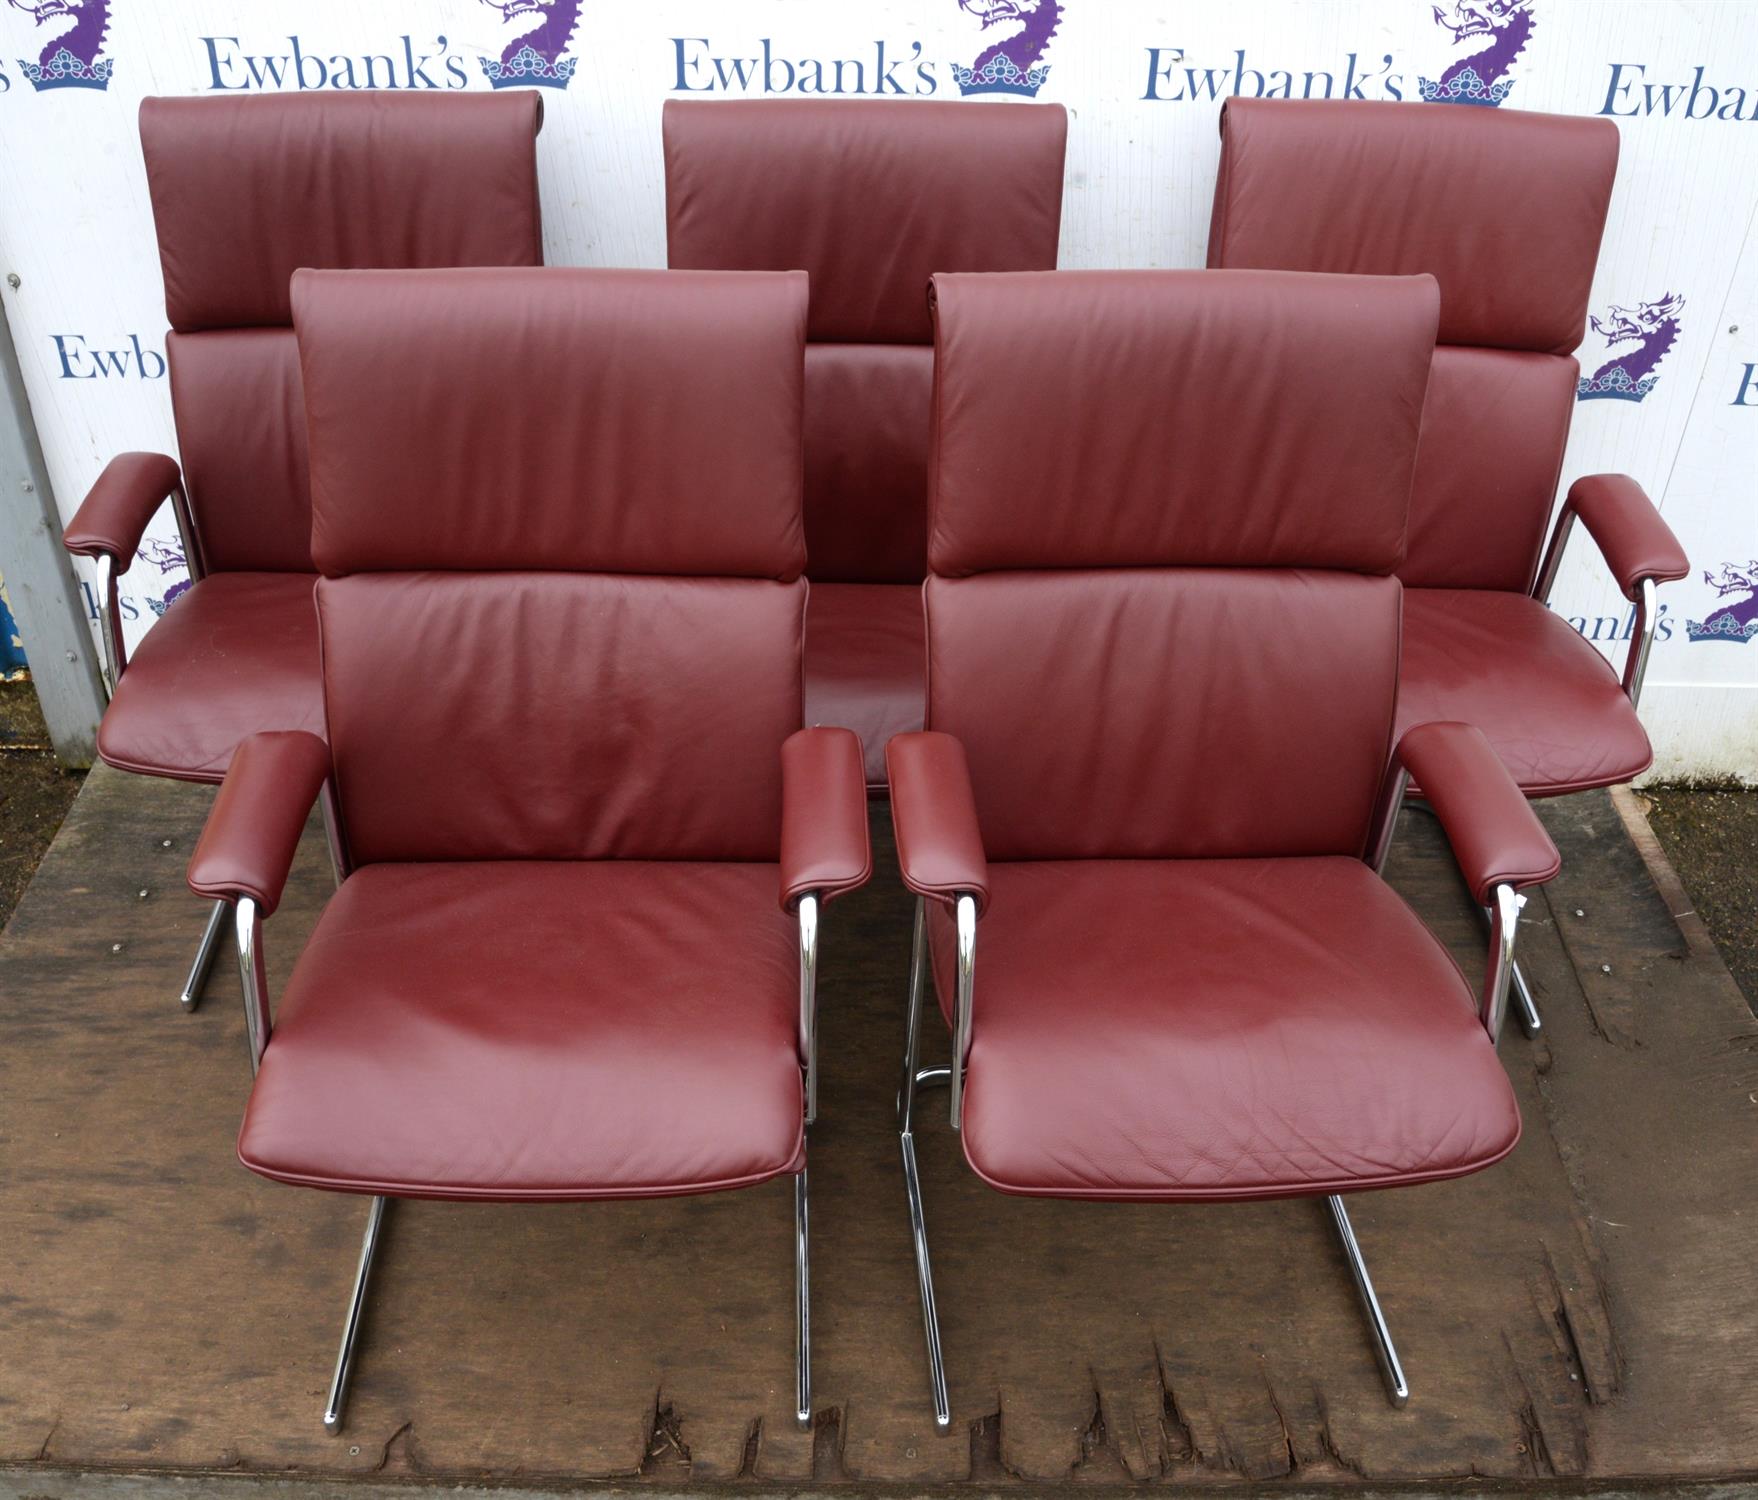 Boss, five executive armchairs, burgundy leather and chromed steel, 104cm high x 61cm wide x 69cm - Image 4 of 6